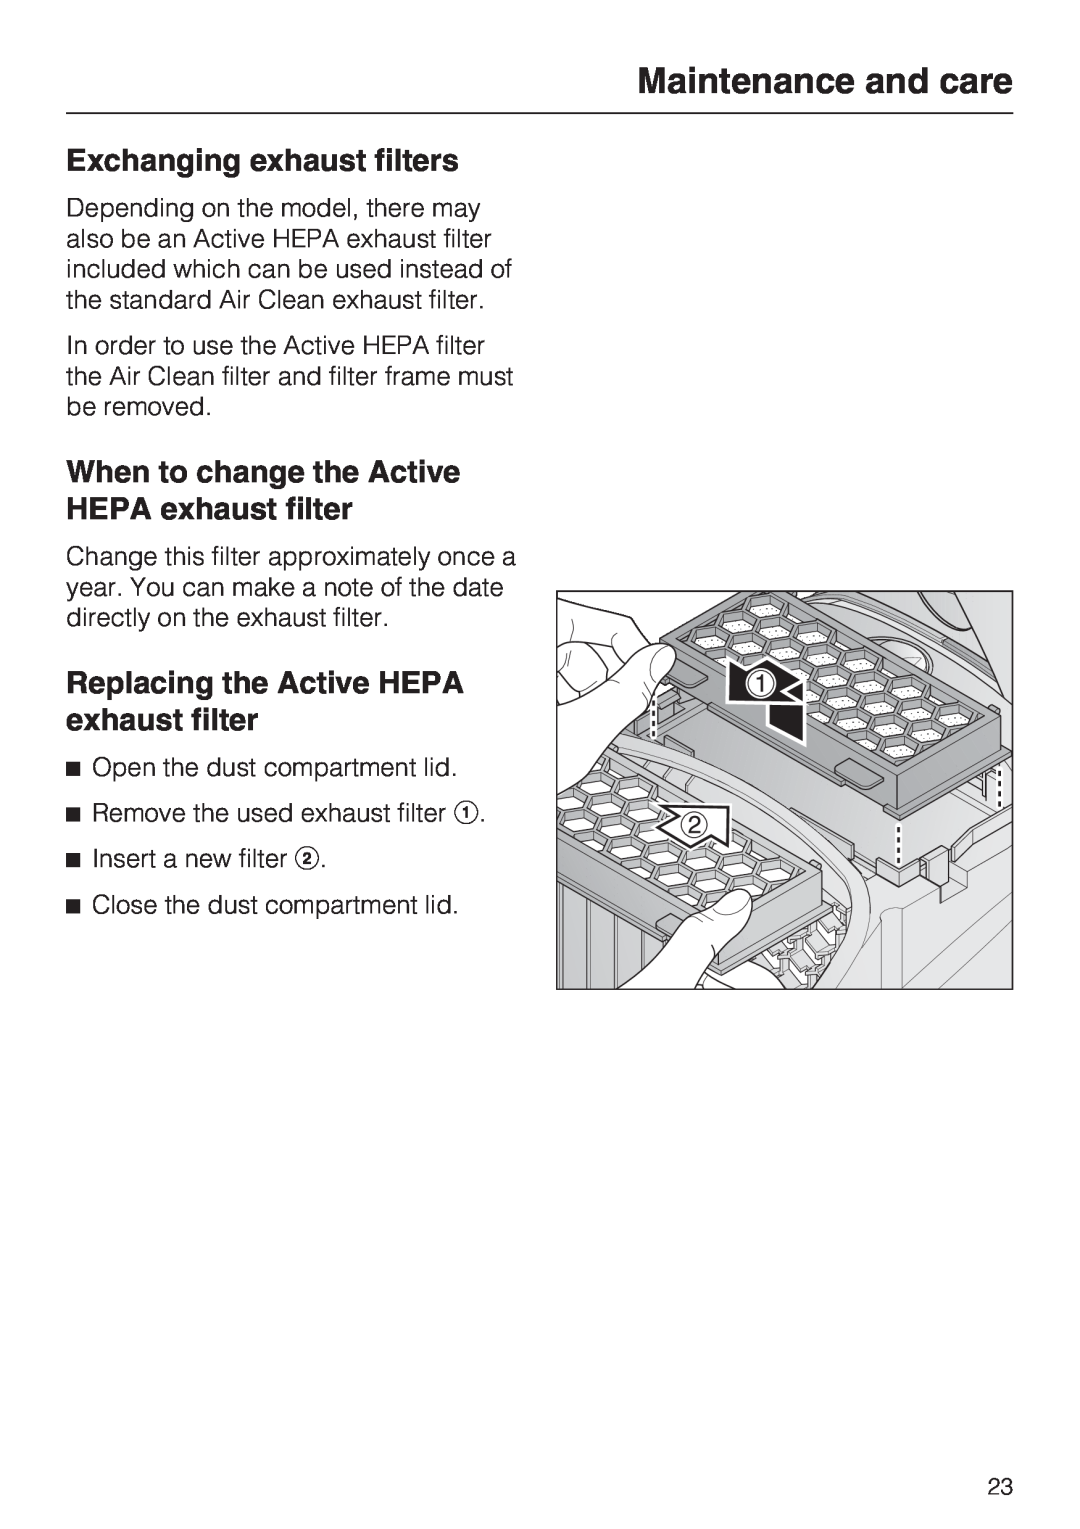 Miele S 2001 manual Exchanging exhaust filters, When to change the Active HEPA exhaust filter, Maintenance and care 